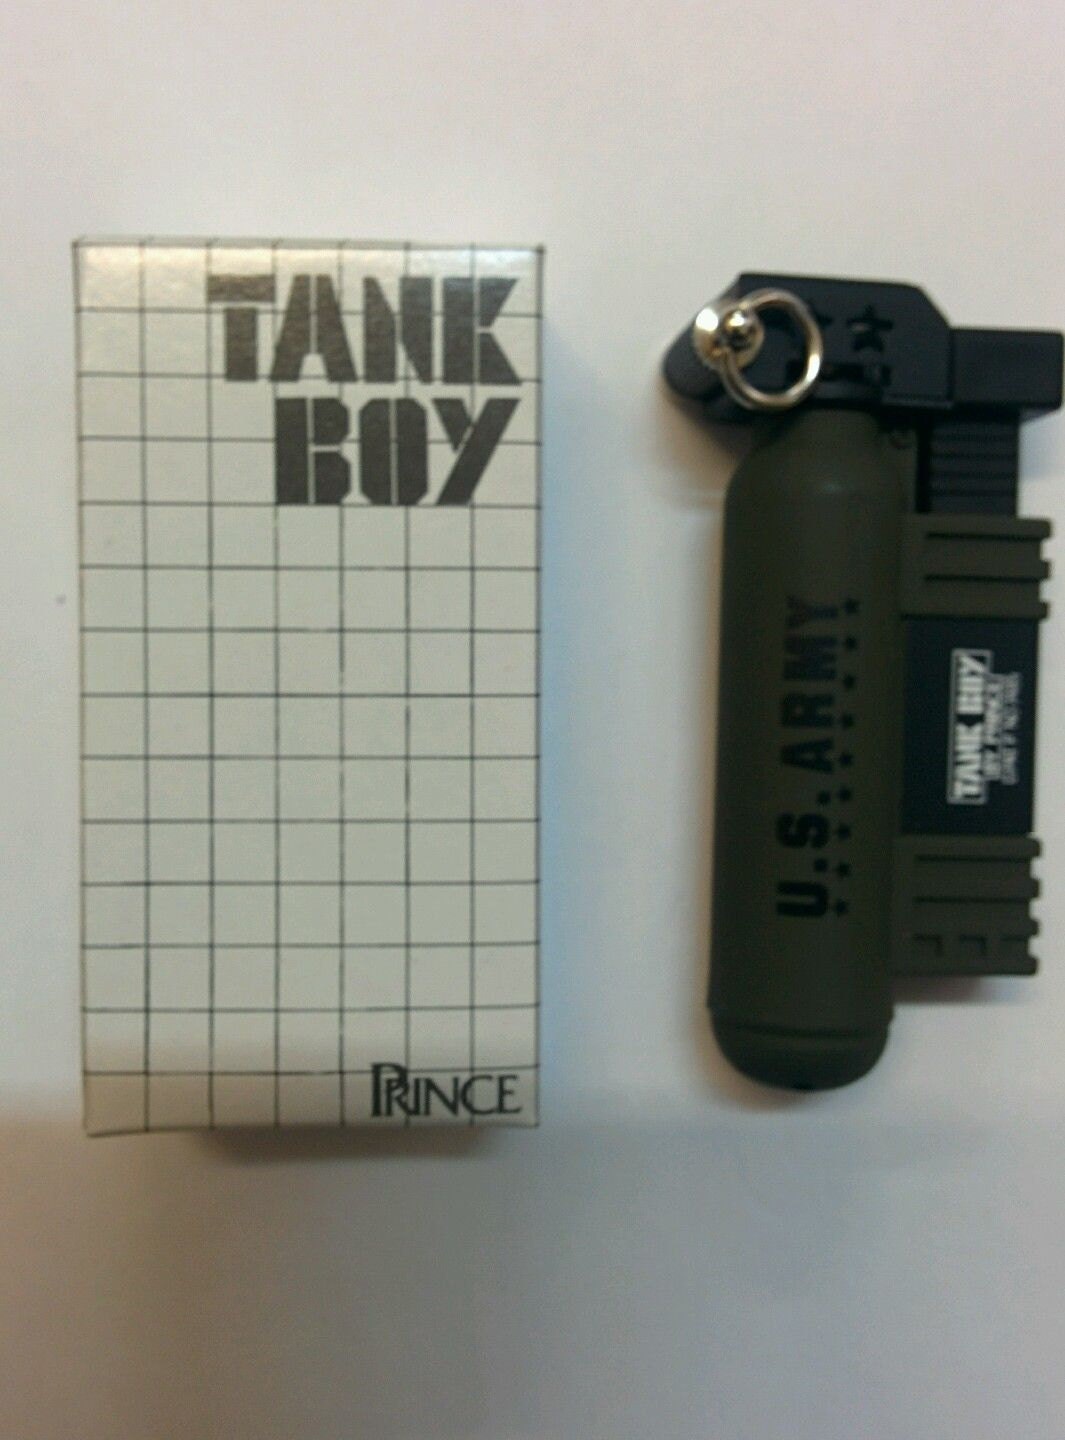 Tank Boy lighter U.S army made in Japan by Prince vintage rare item in box new